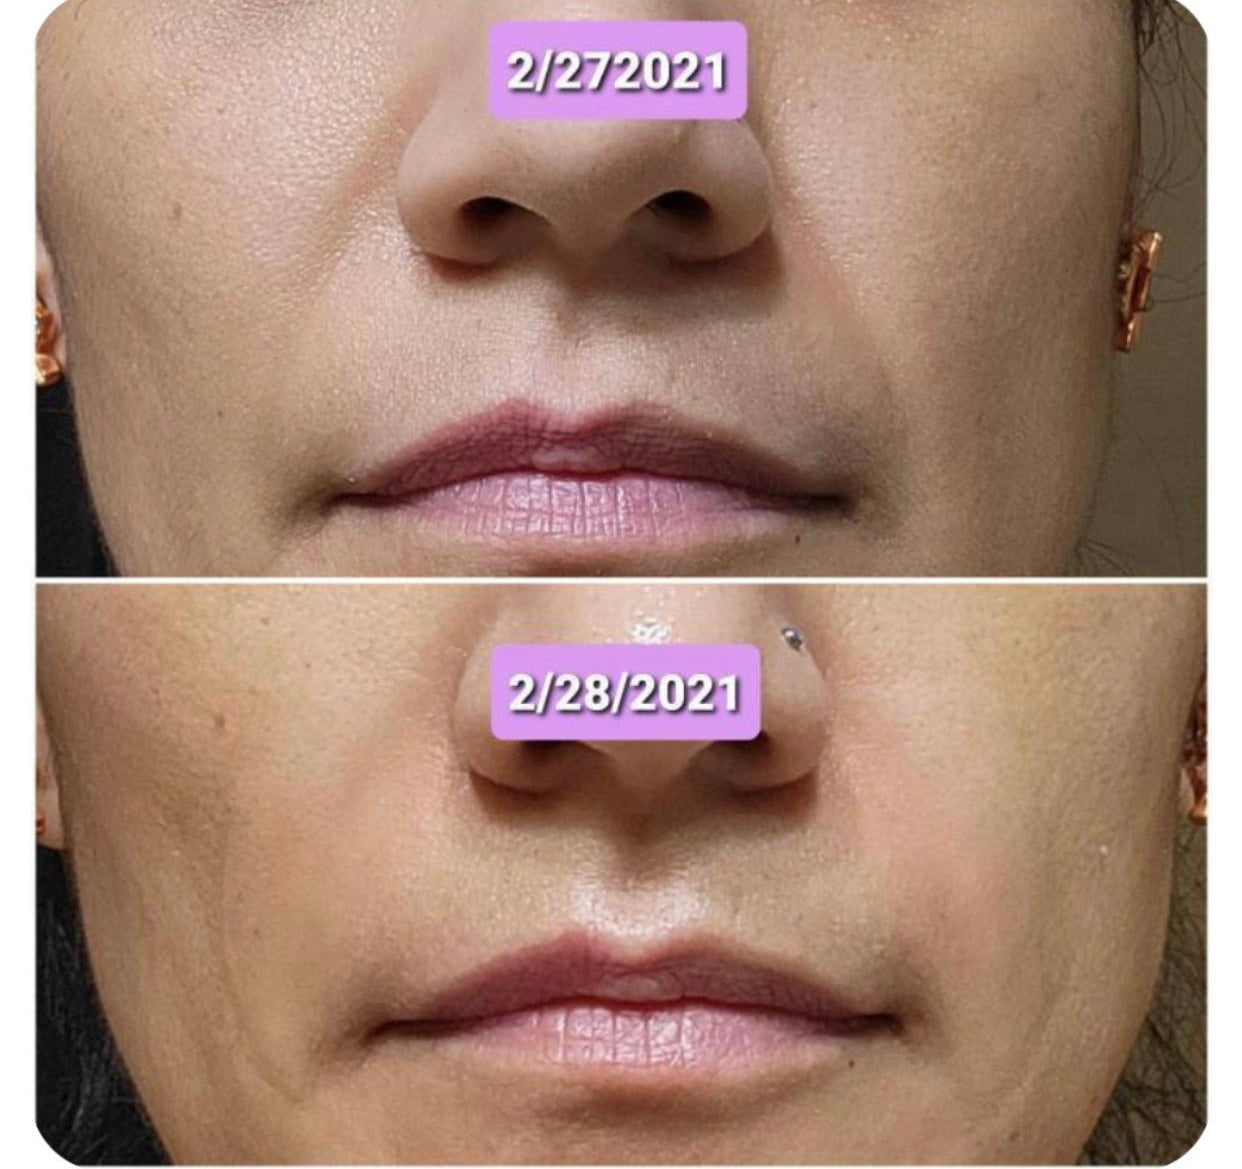 Lower half of a woman's face that has the date 2/27/2021 and another image that has the date 2/28/2021 shows improvement after one day using Frownies Facial Patch for wrinkles on the corner of the mouth